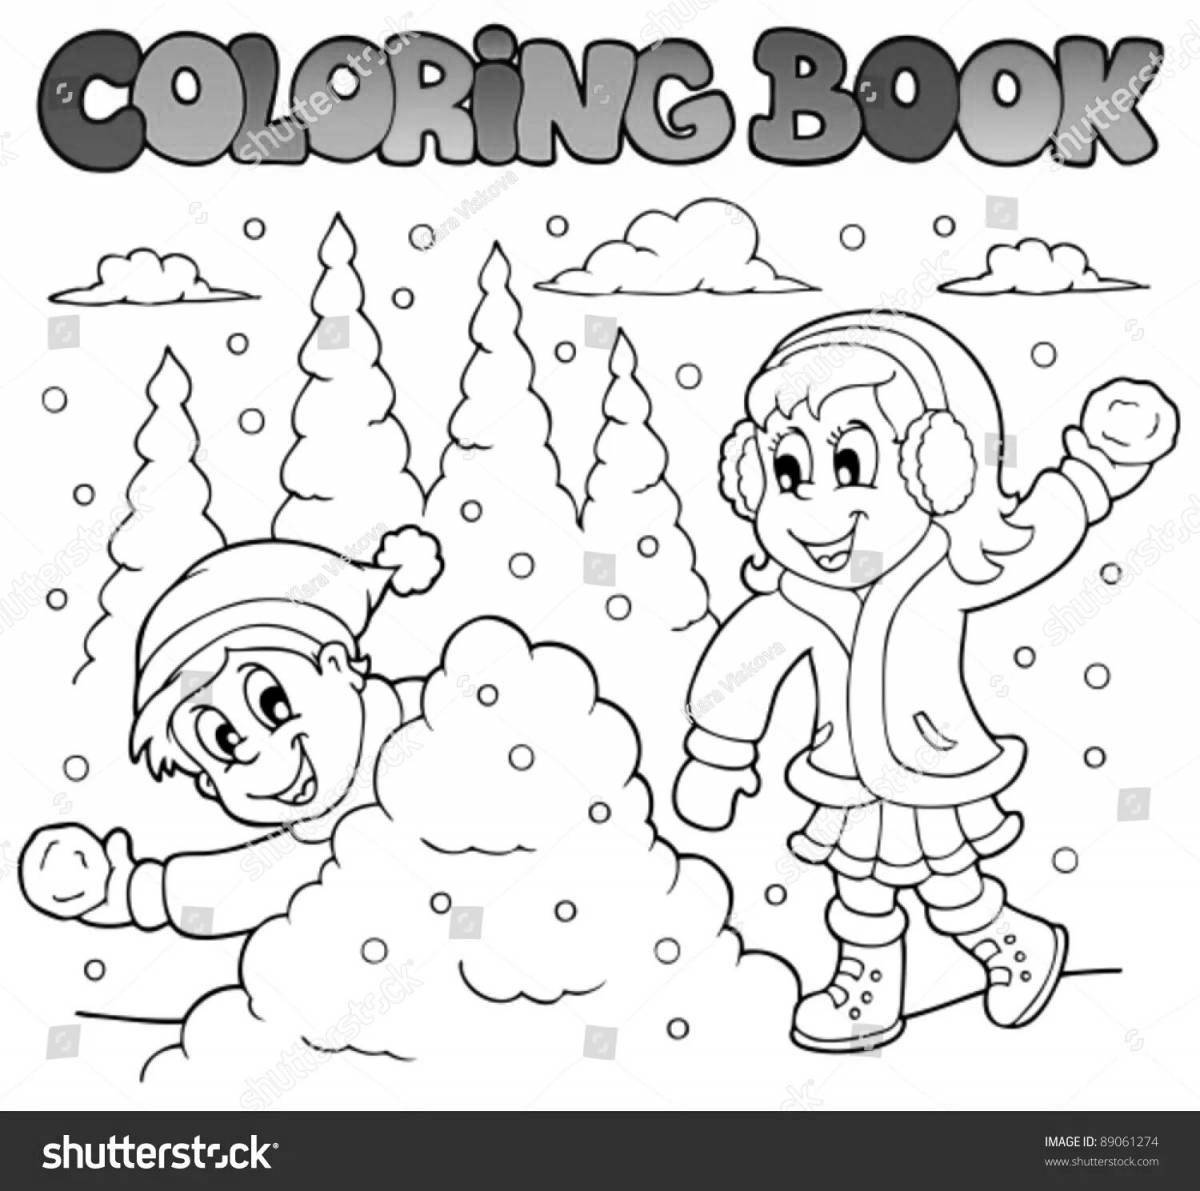 Joyful snowball fight coloring for kids